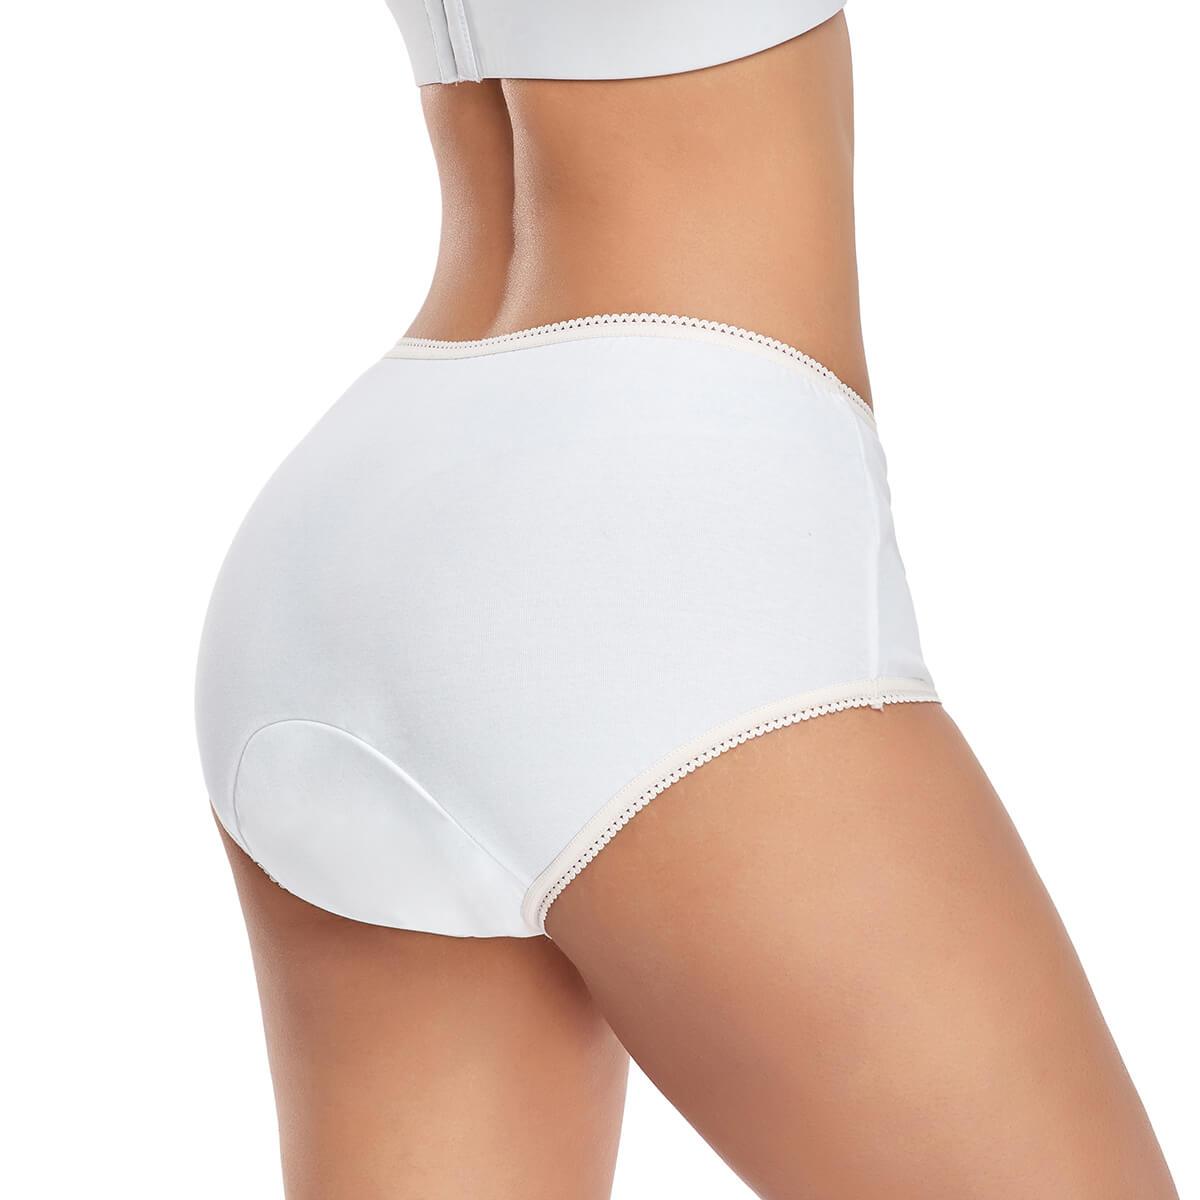 Reusable Incontinence Underwear for Women, Fast-Absorbing, Leakproof,  Machine Washable, Soft, Breathable, Large, Full Brief